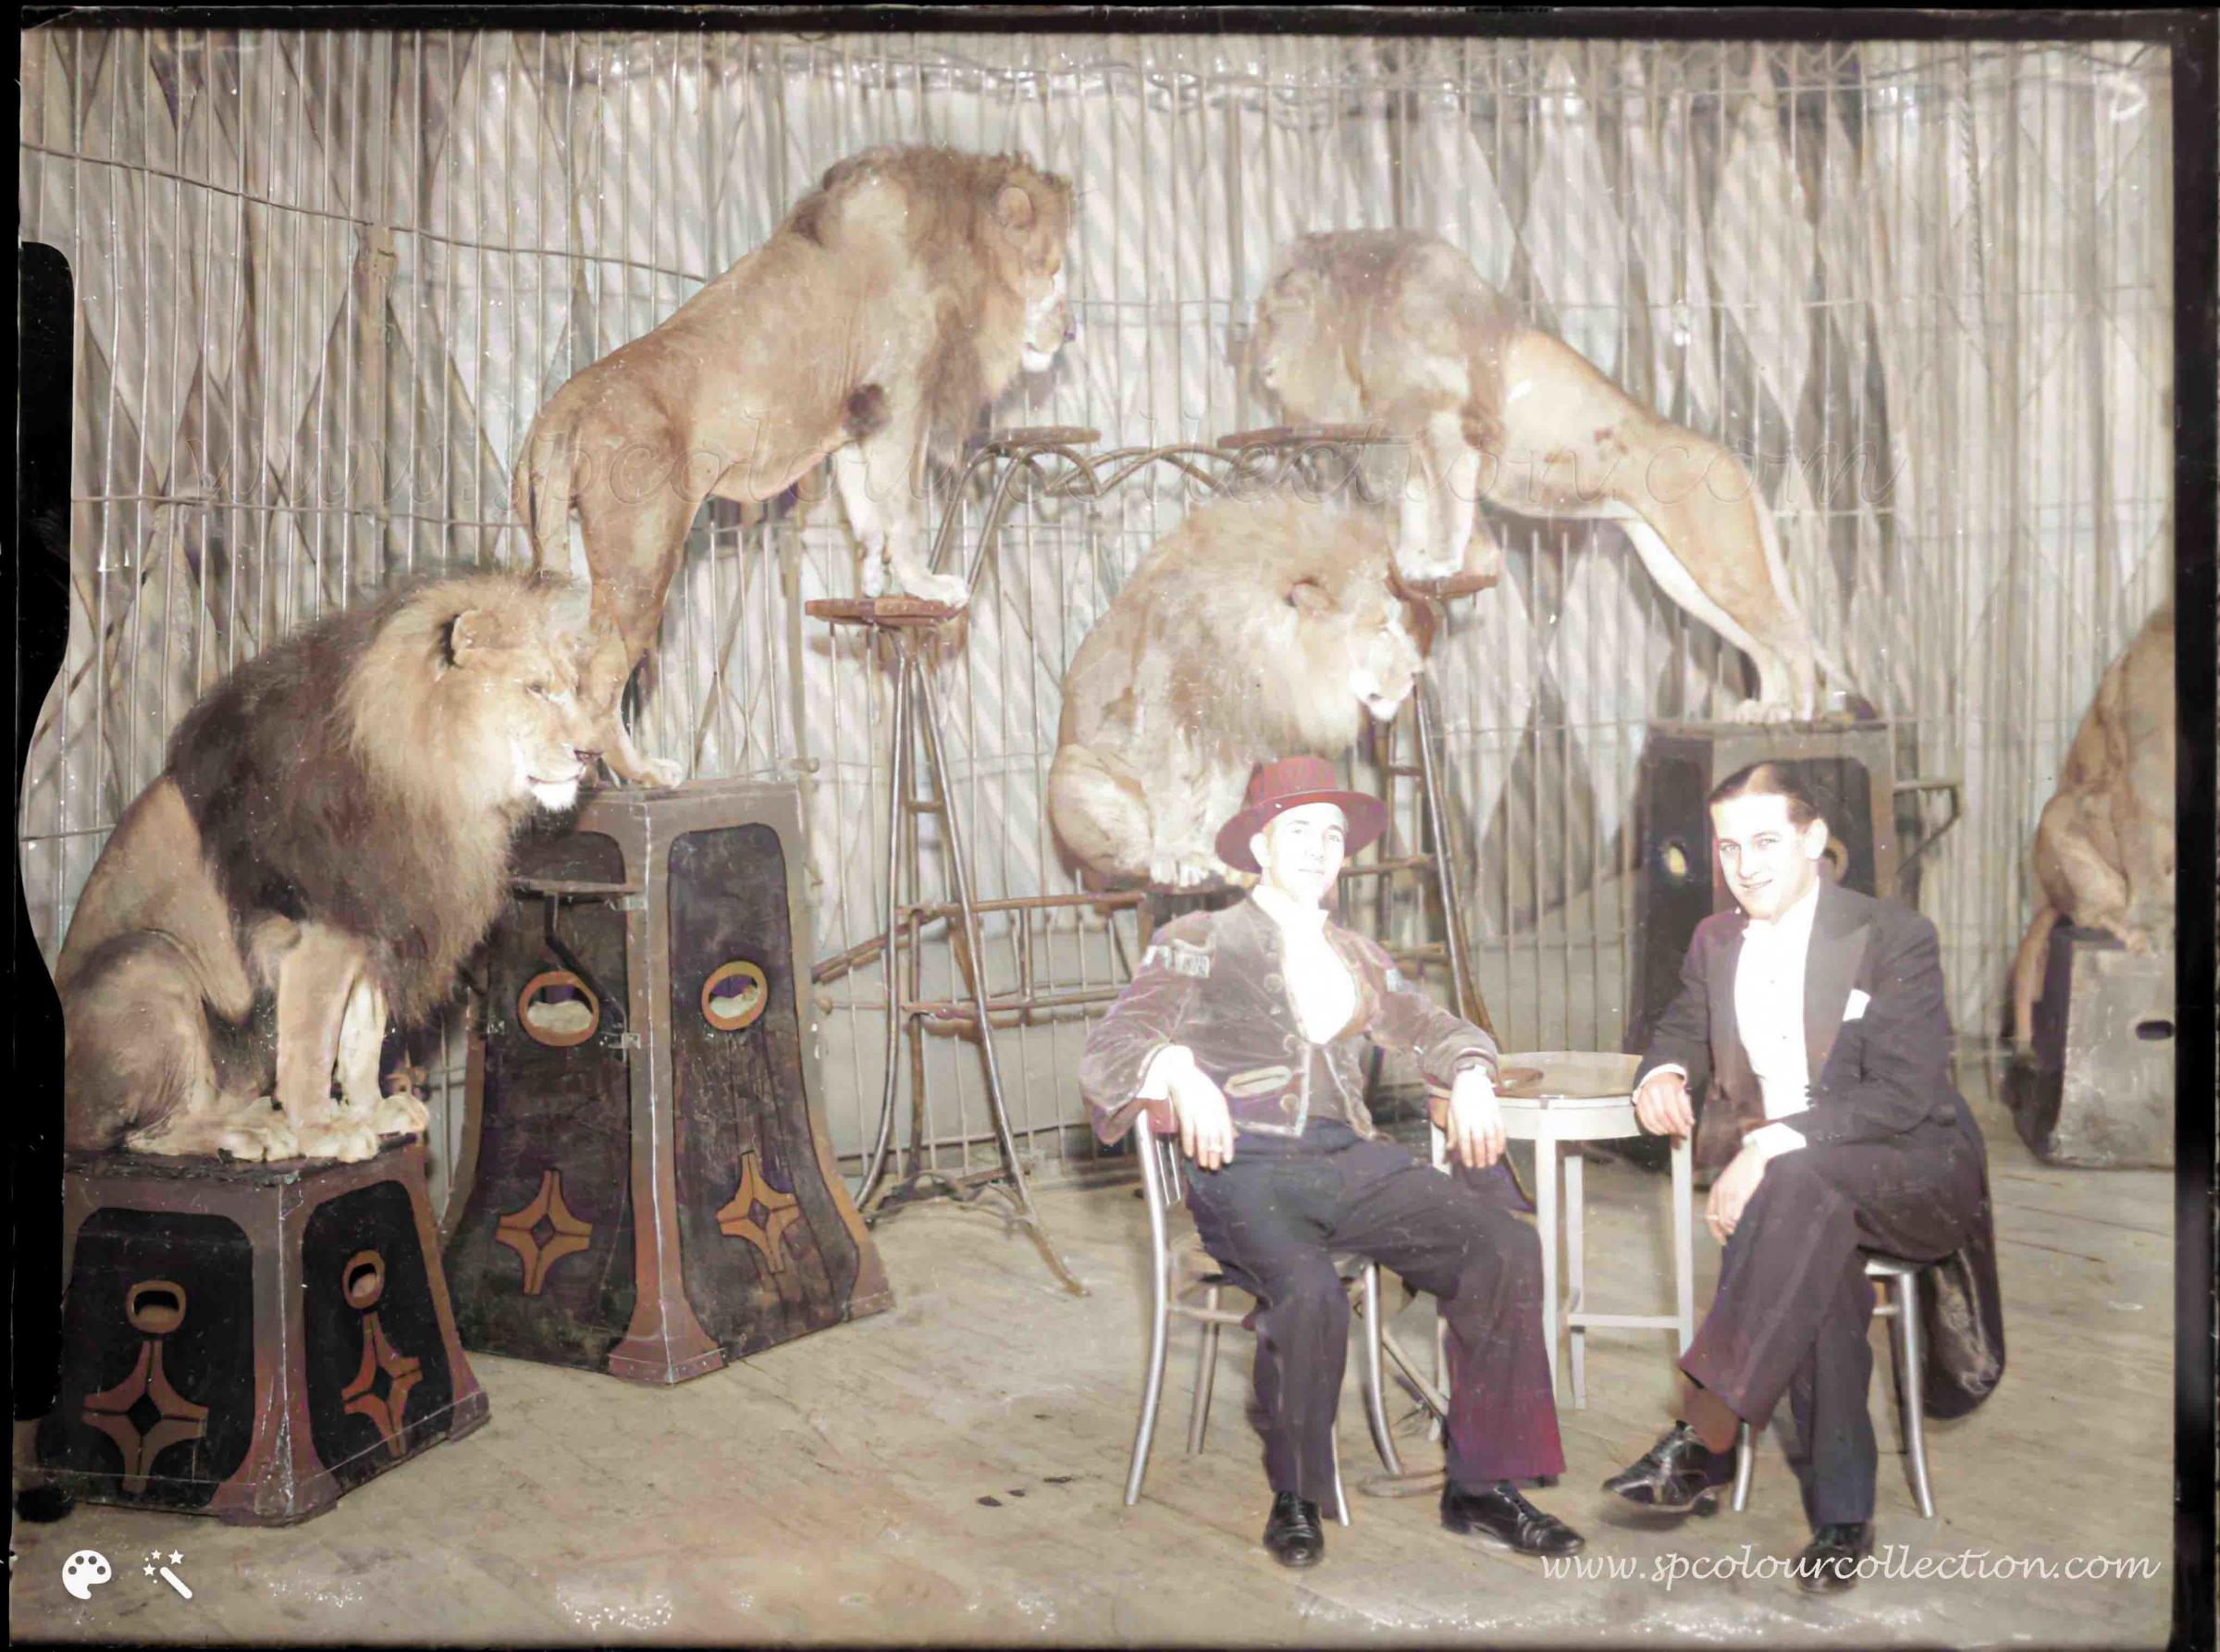 Lions at the circus in 1936, a scene that would cause outrage today